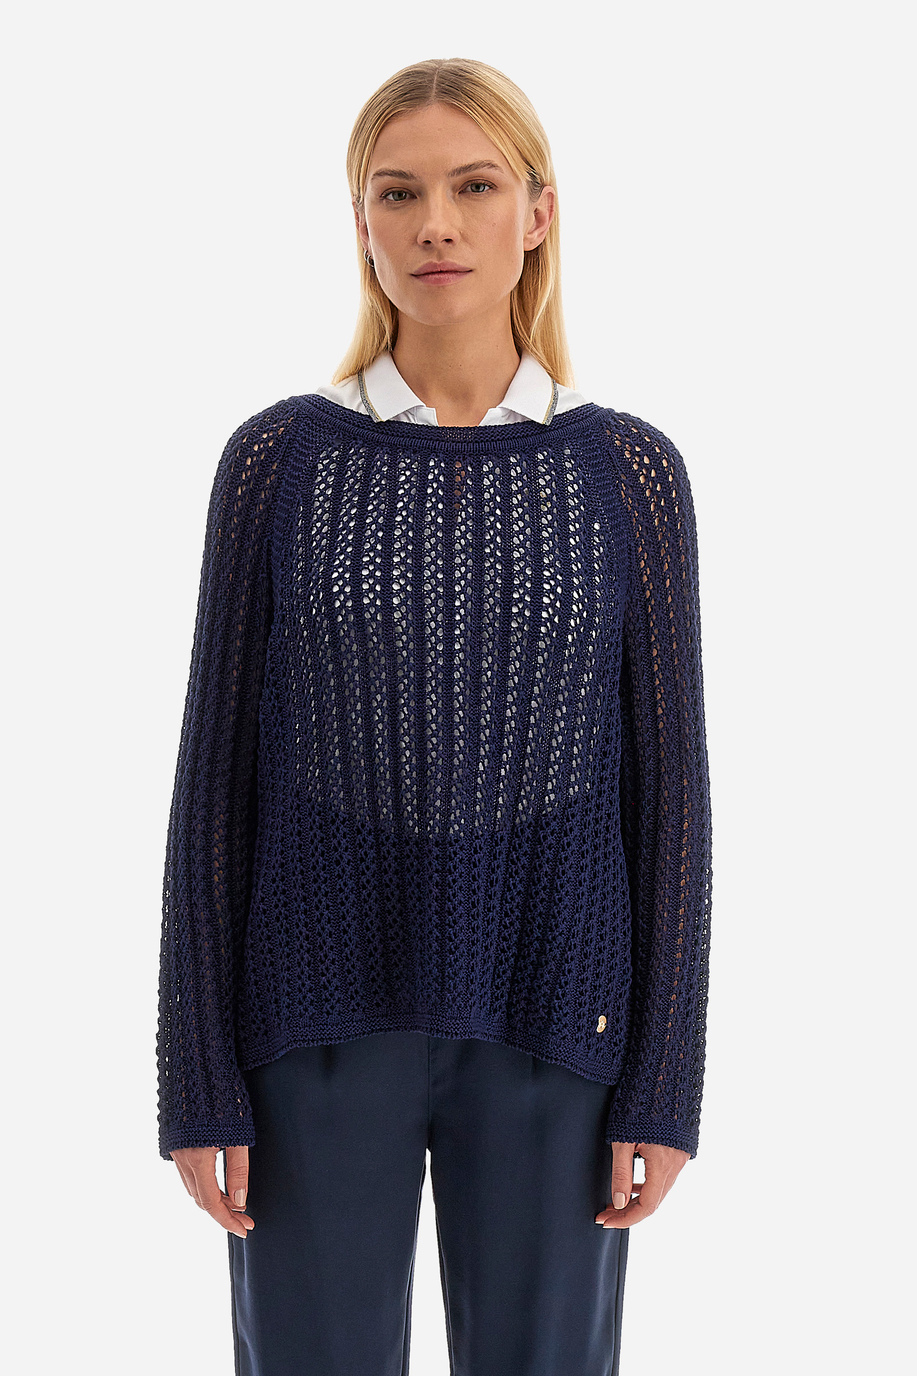 Women's round neck tricot sweater in solid color Spring Weekend capsule - Victoire - Sweatshirts | La Martina - Official Online Shop